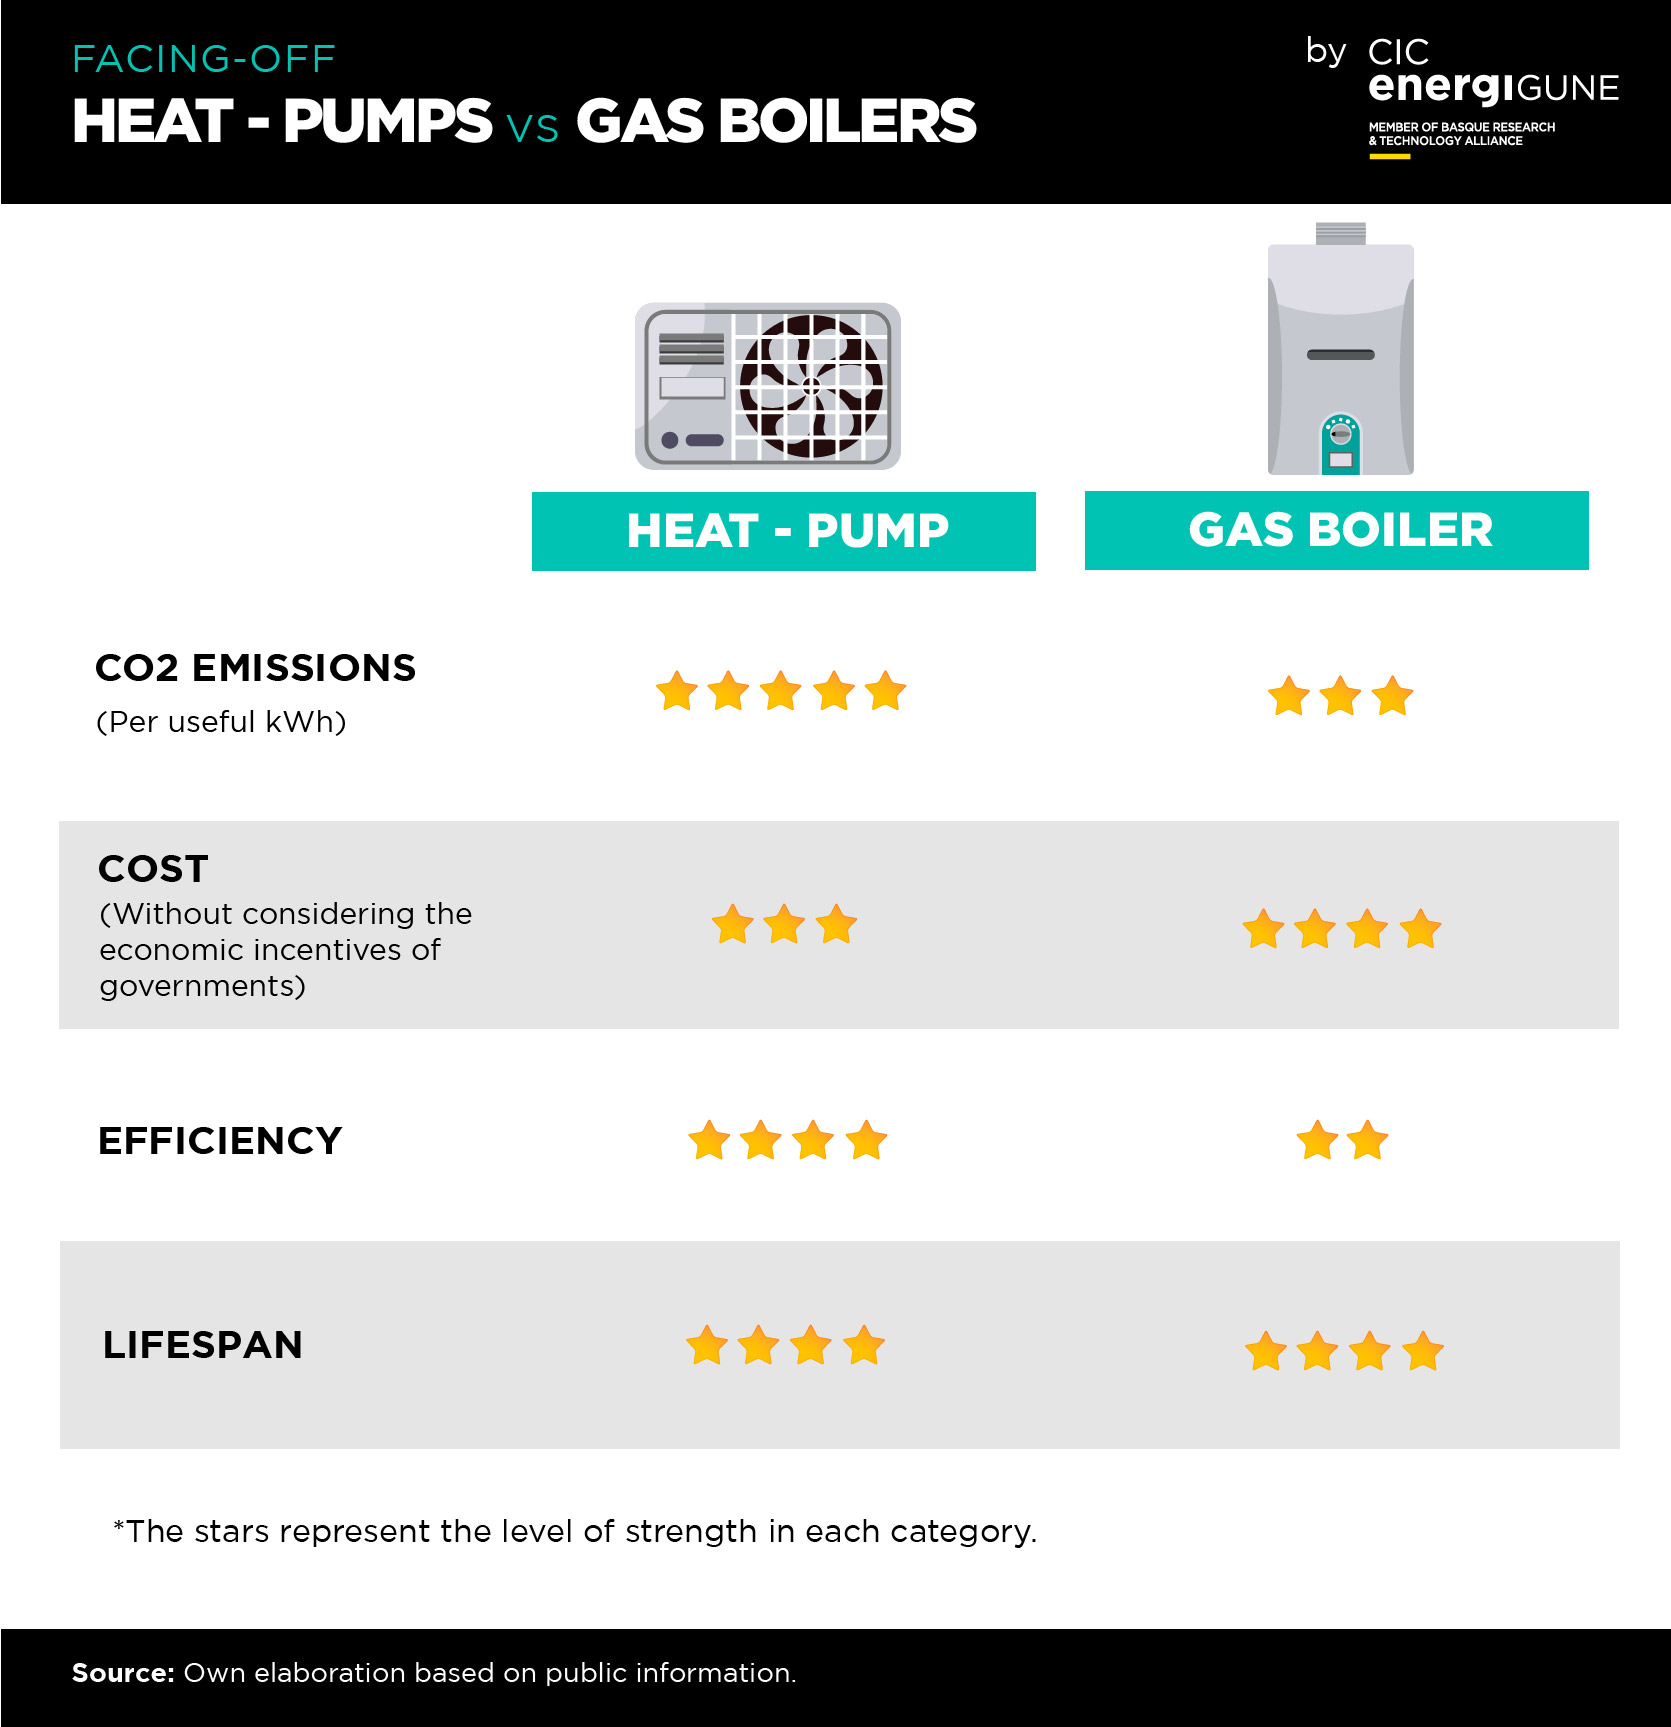 Comparison between heat-pumps and gas boilers taking into account different aspects (CO2 emissions per useful kWh, Cost - without considering economical incentives from governments-, efficiency and lifespan).